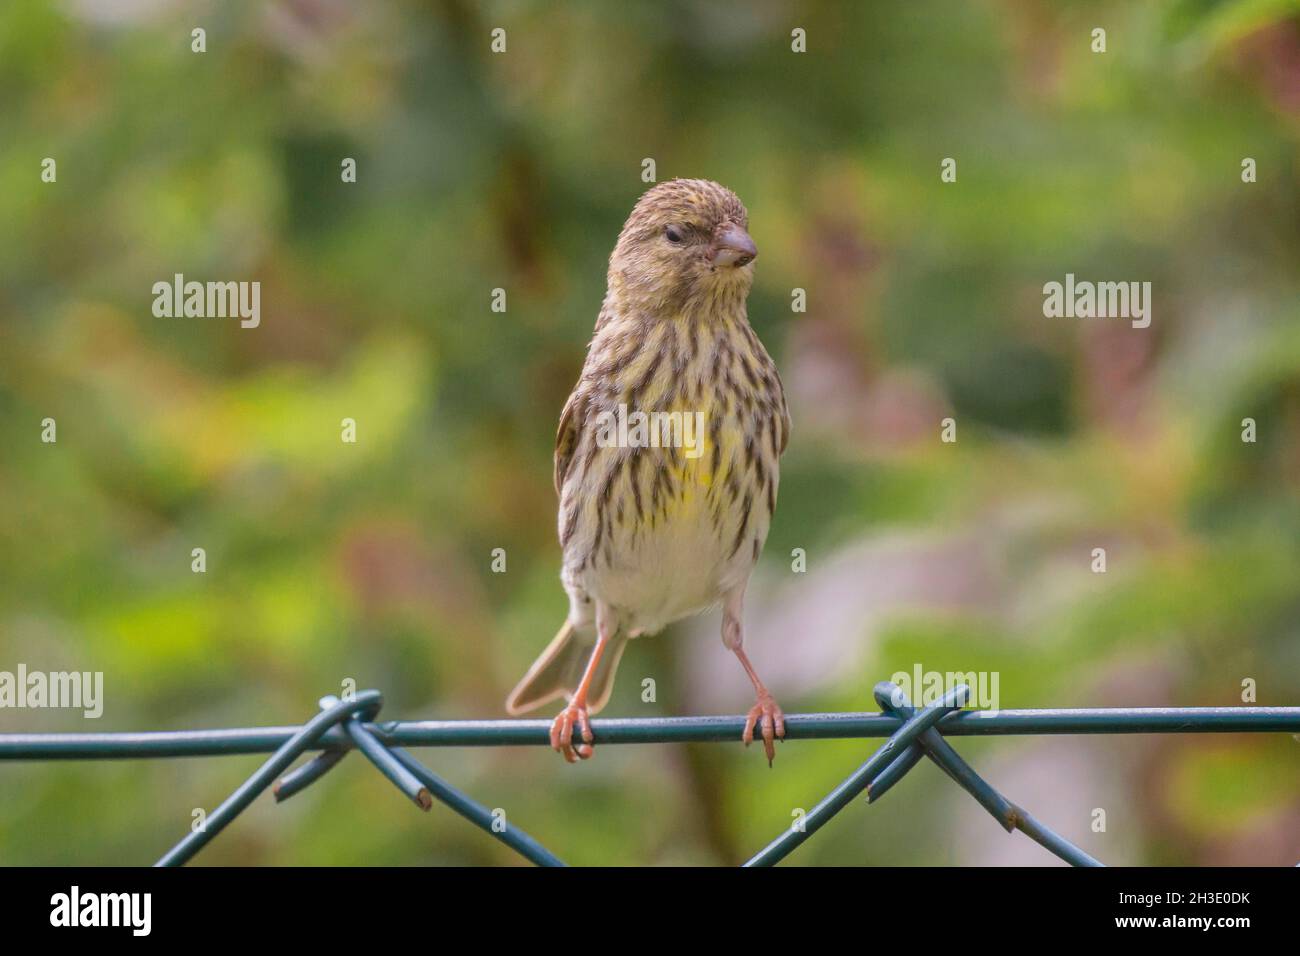 European serin (Serinus serinus), female perched on a garden fence, stretching, Germany Stock Photo